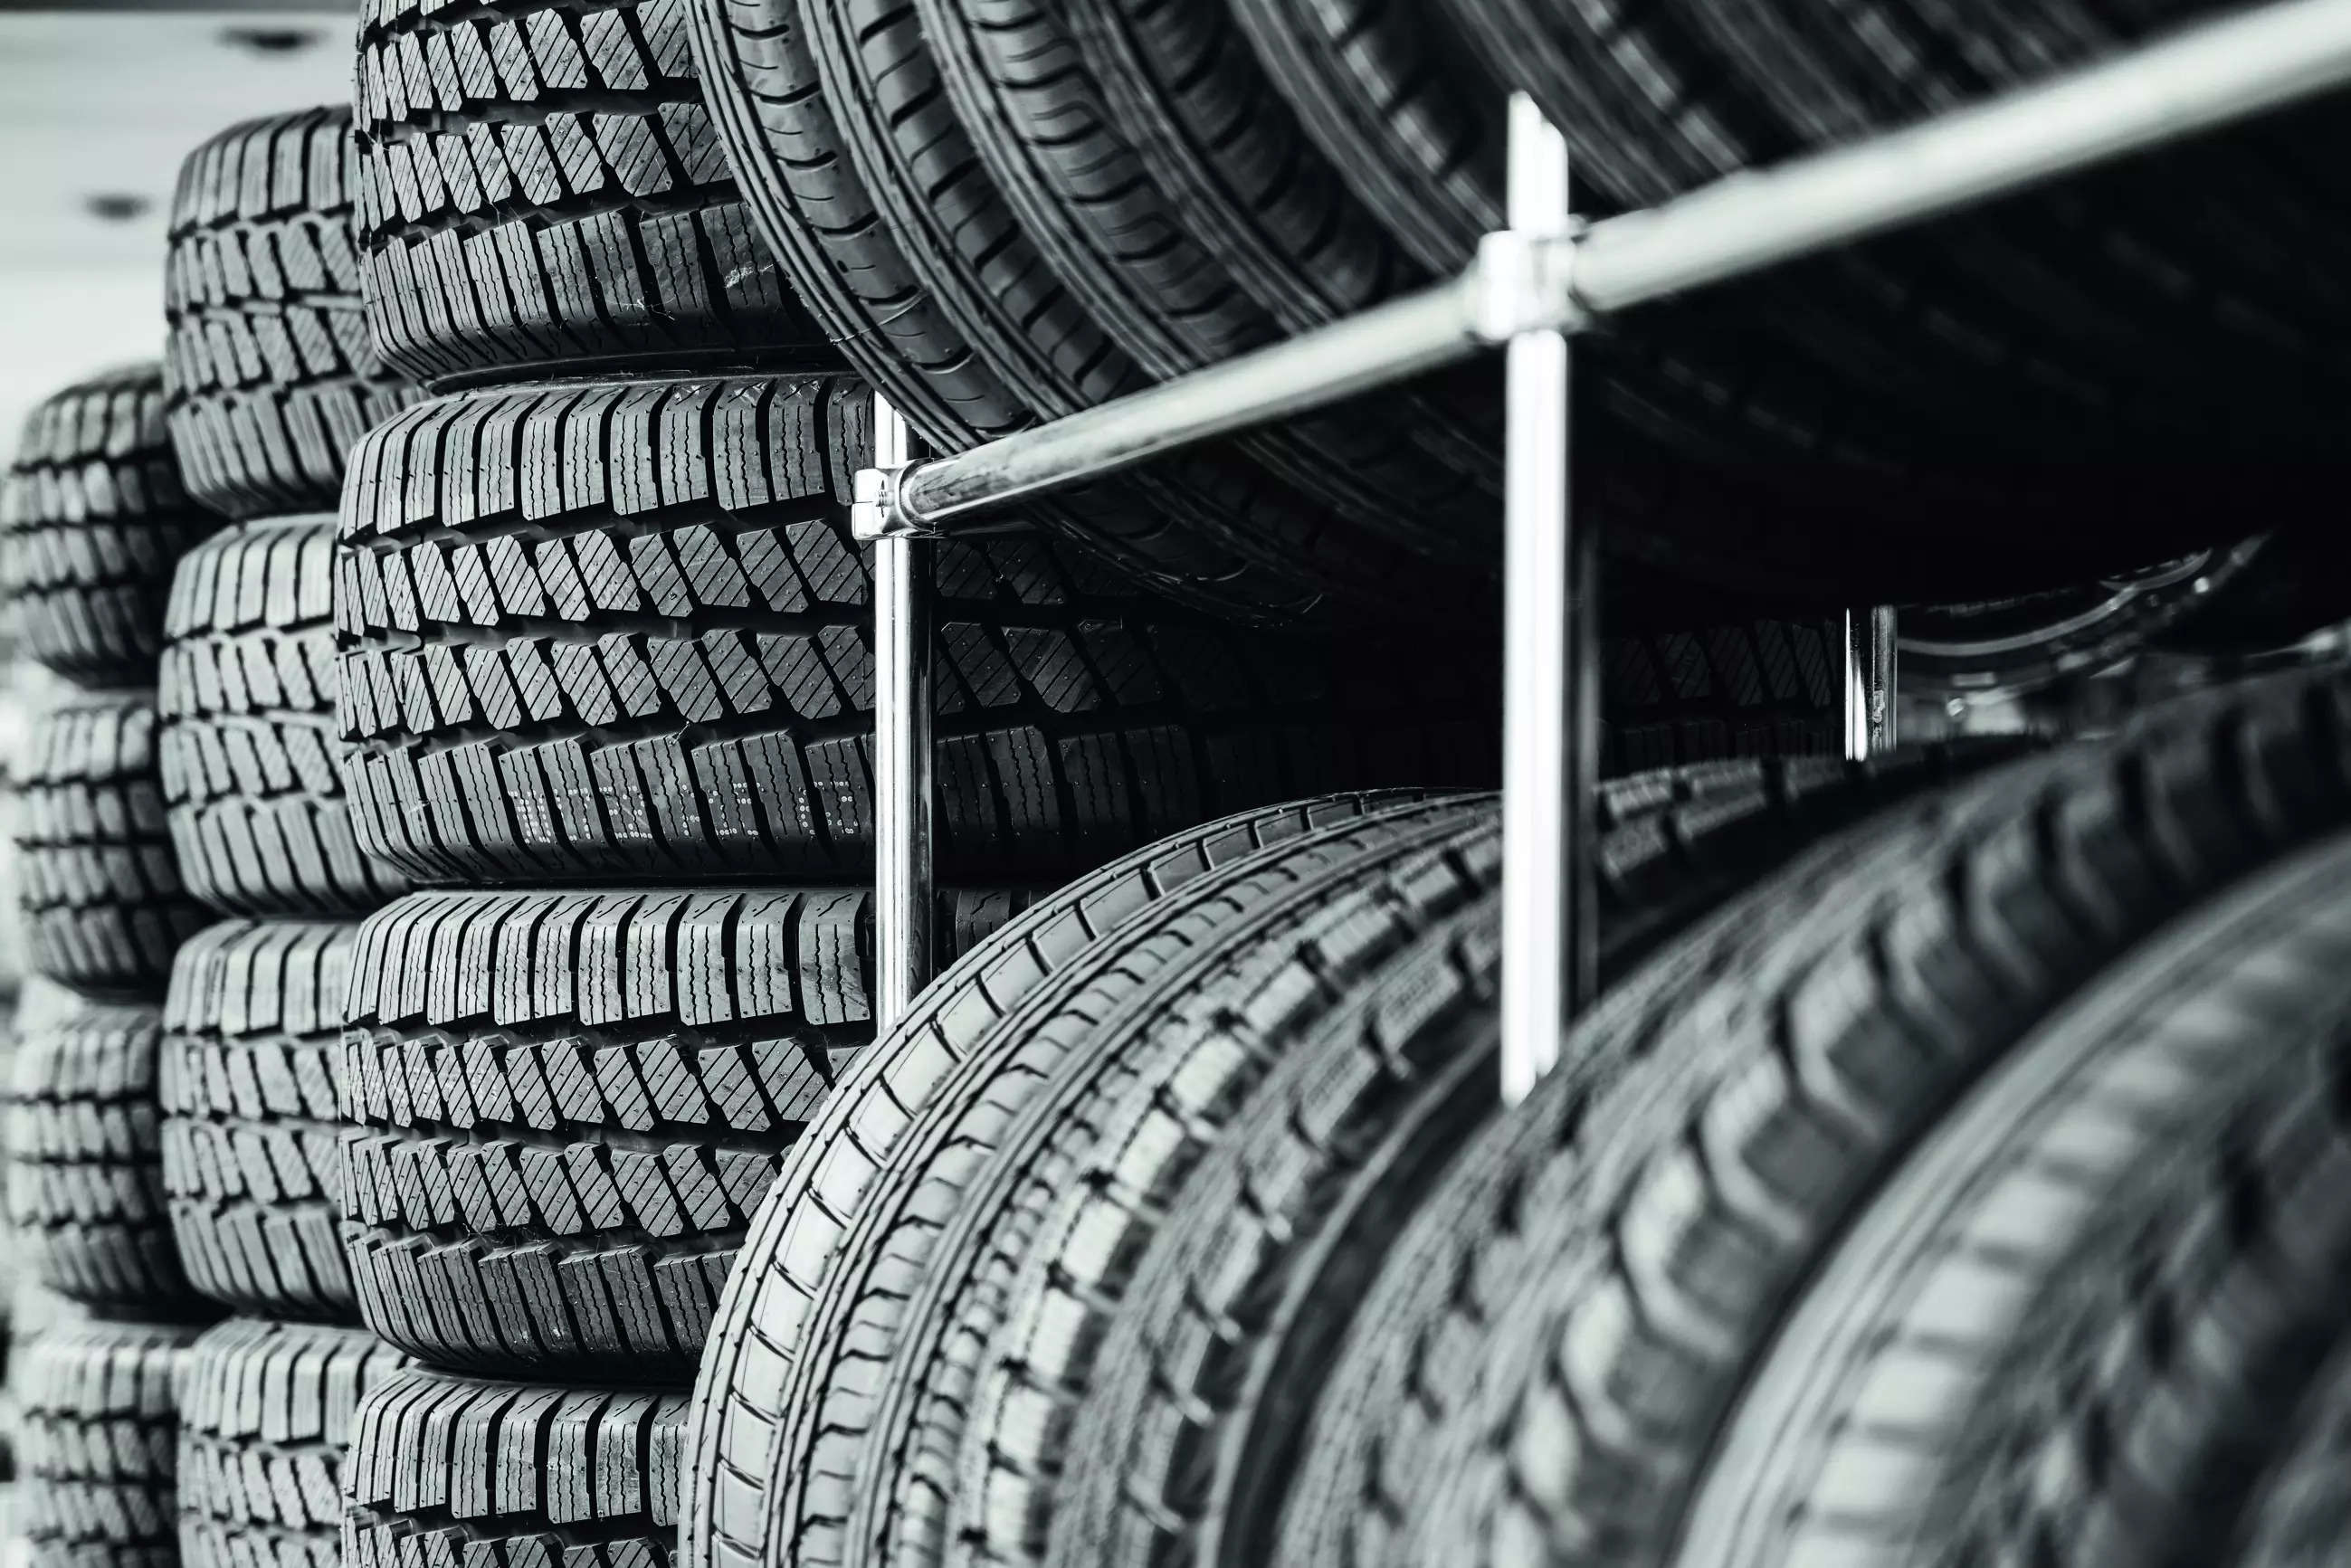 Tyre stocks surge up to 13% amid reports of price rise 